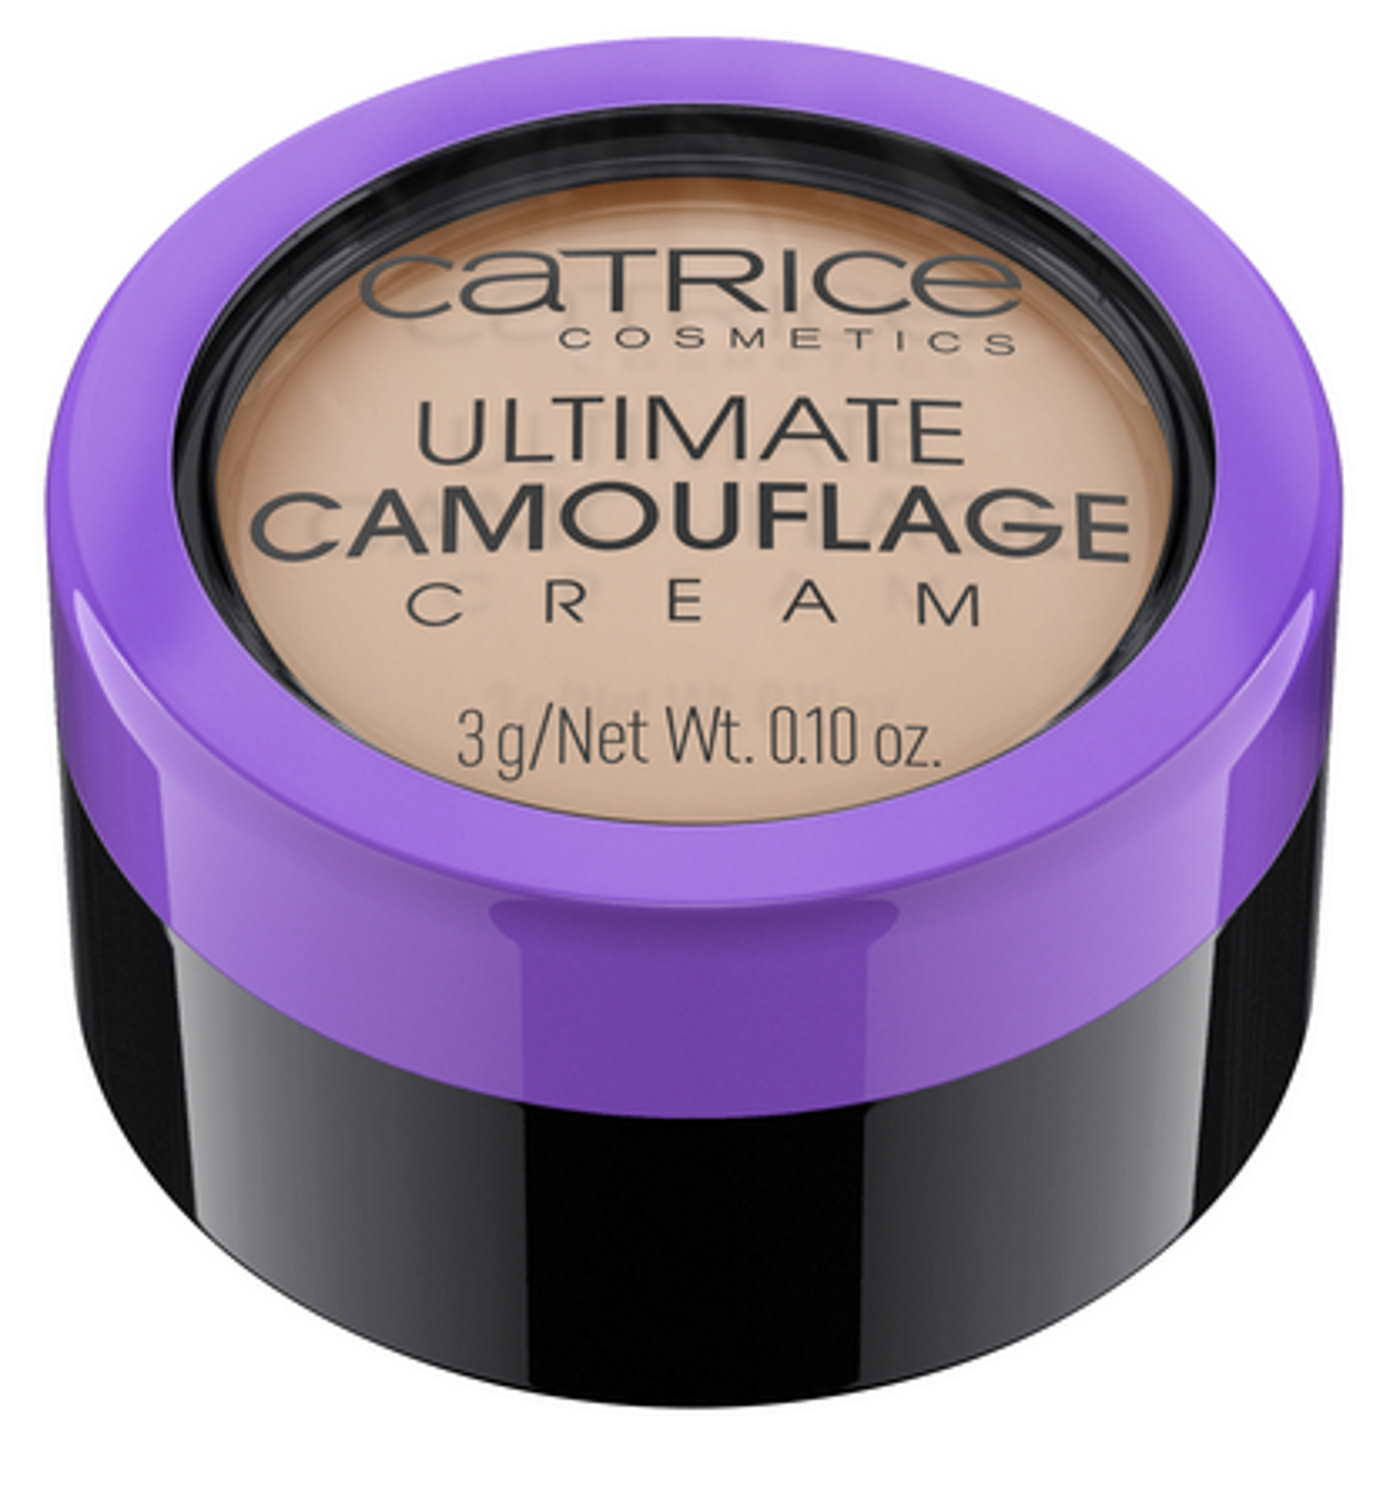 Catrice Ultimate Camouflage Cream 020 N Light Beige 3G